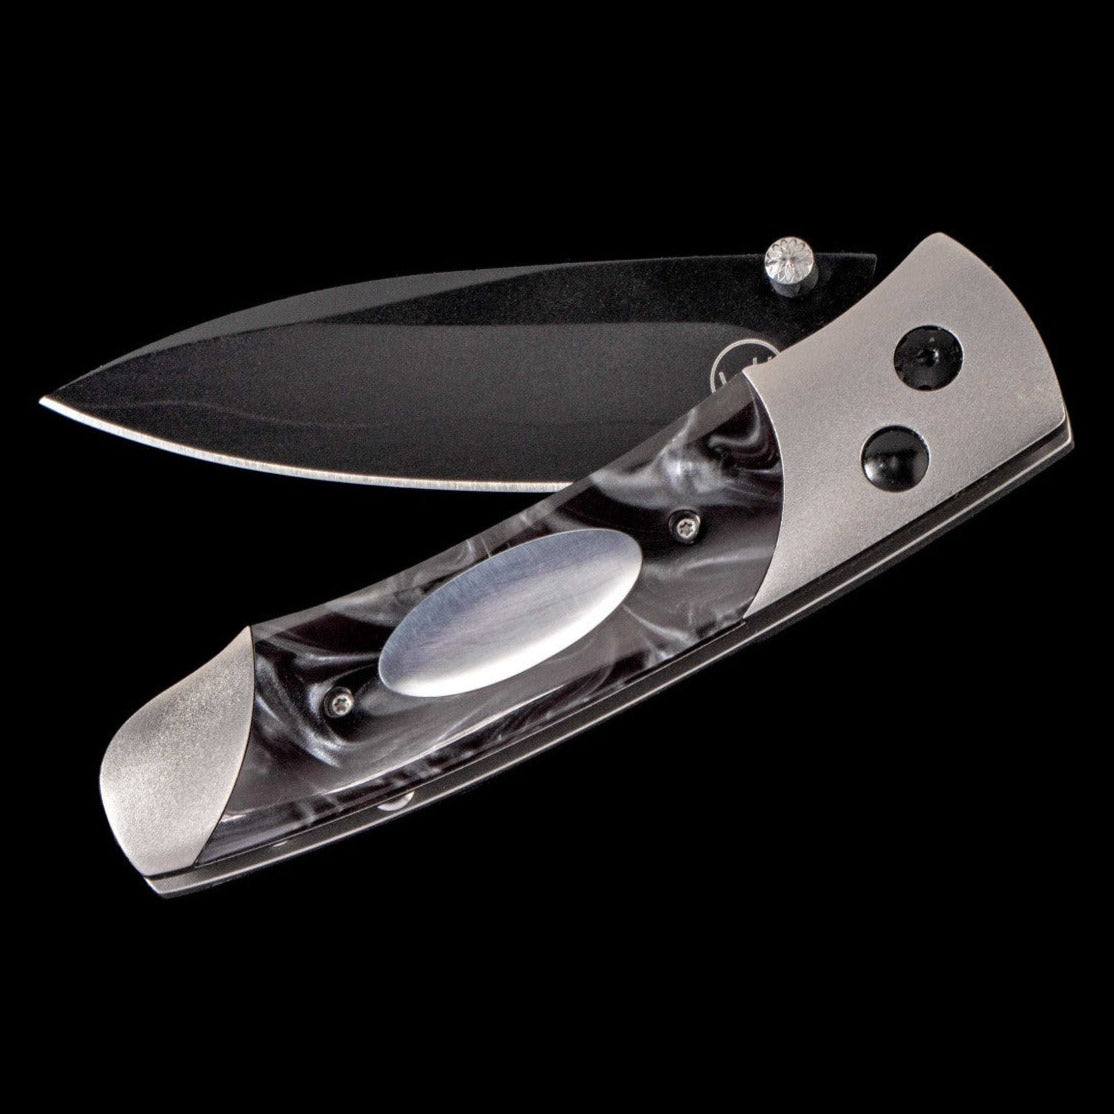 William Henry A200-1B Knife-Knives & Tools-Kevin's Fine Outdoor Gear & Apparel